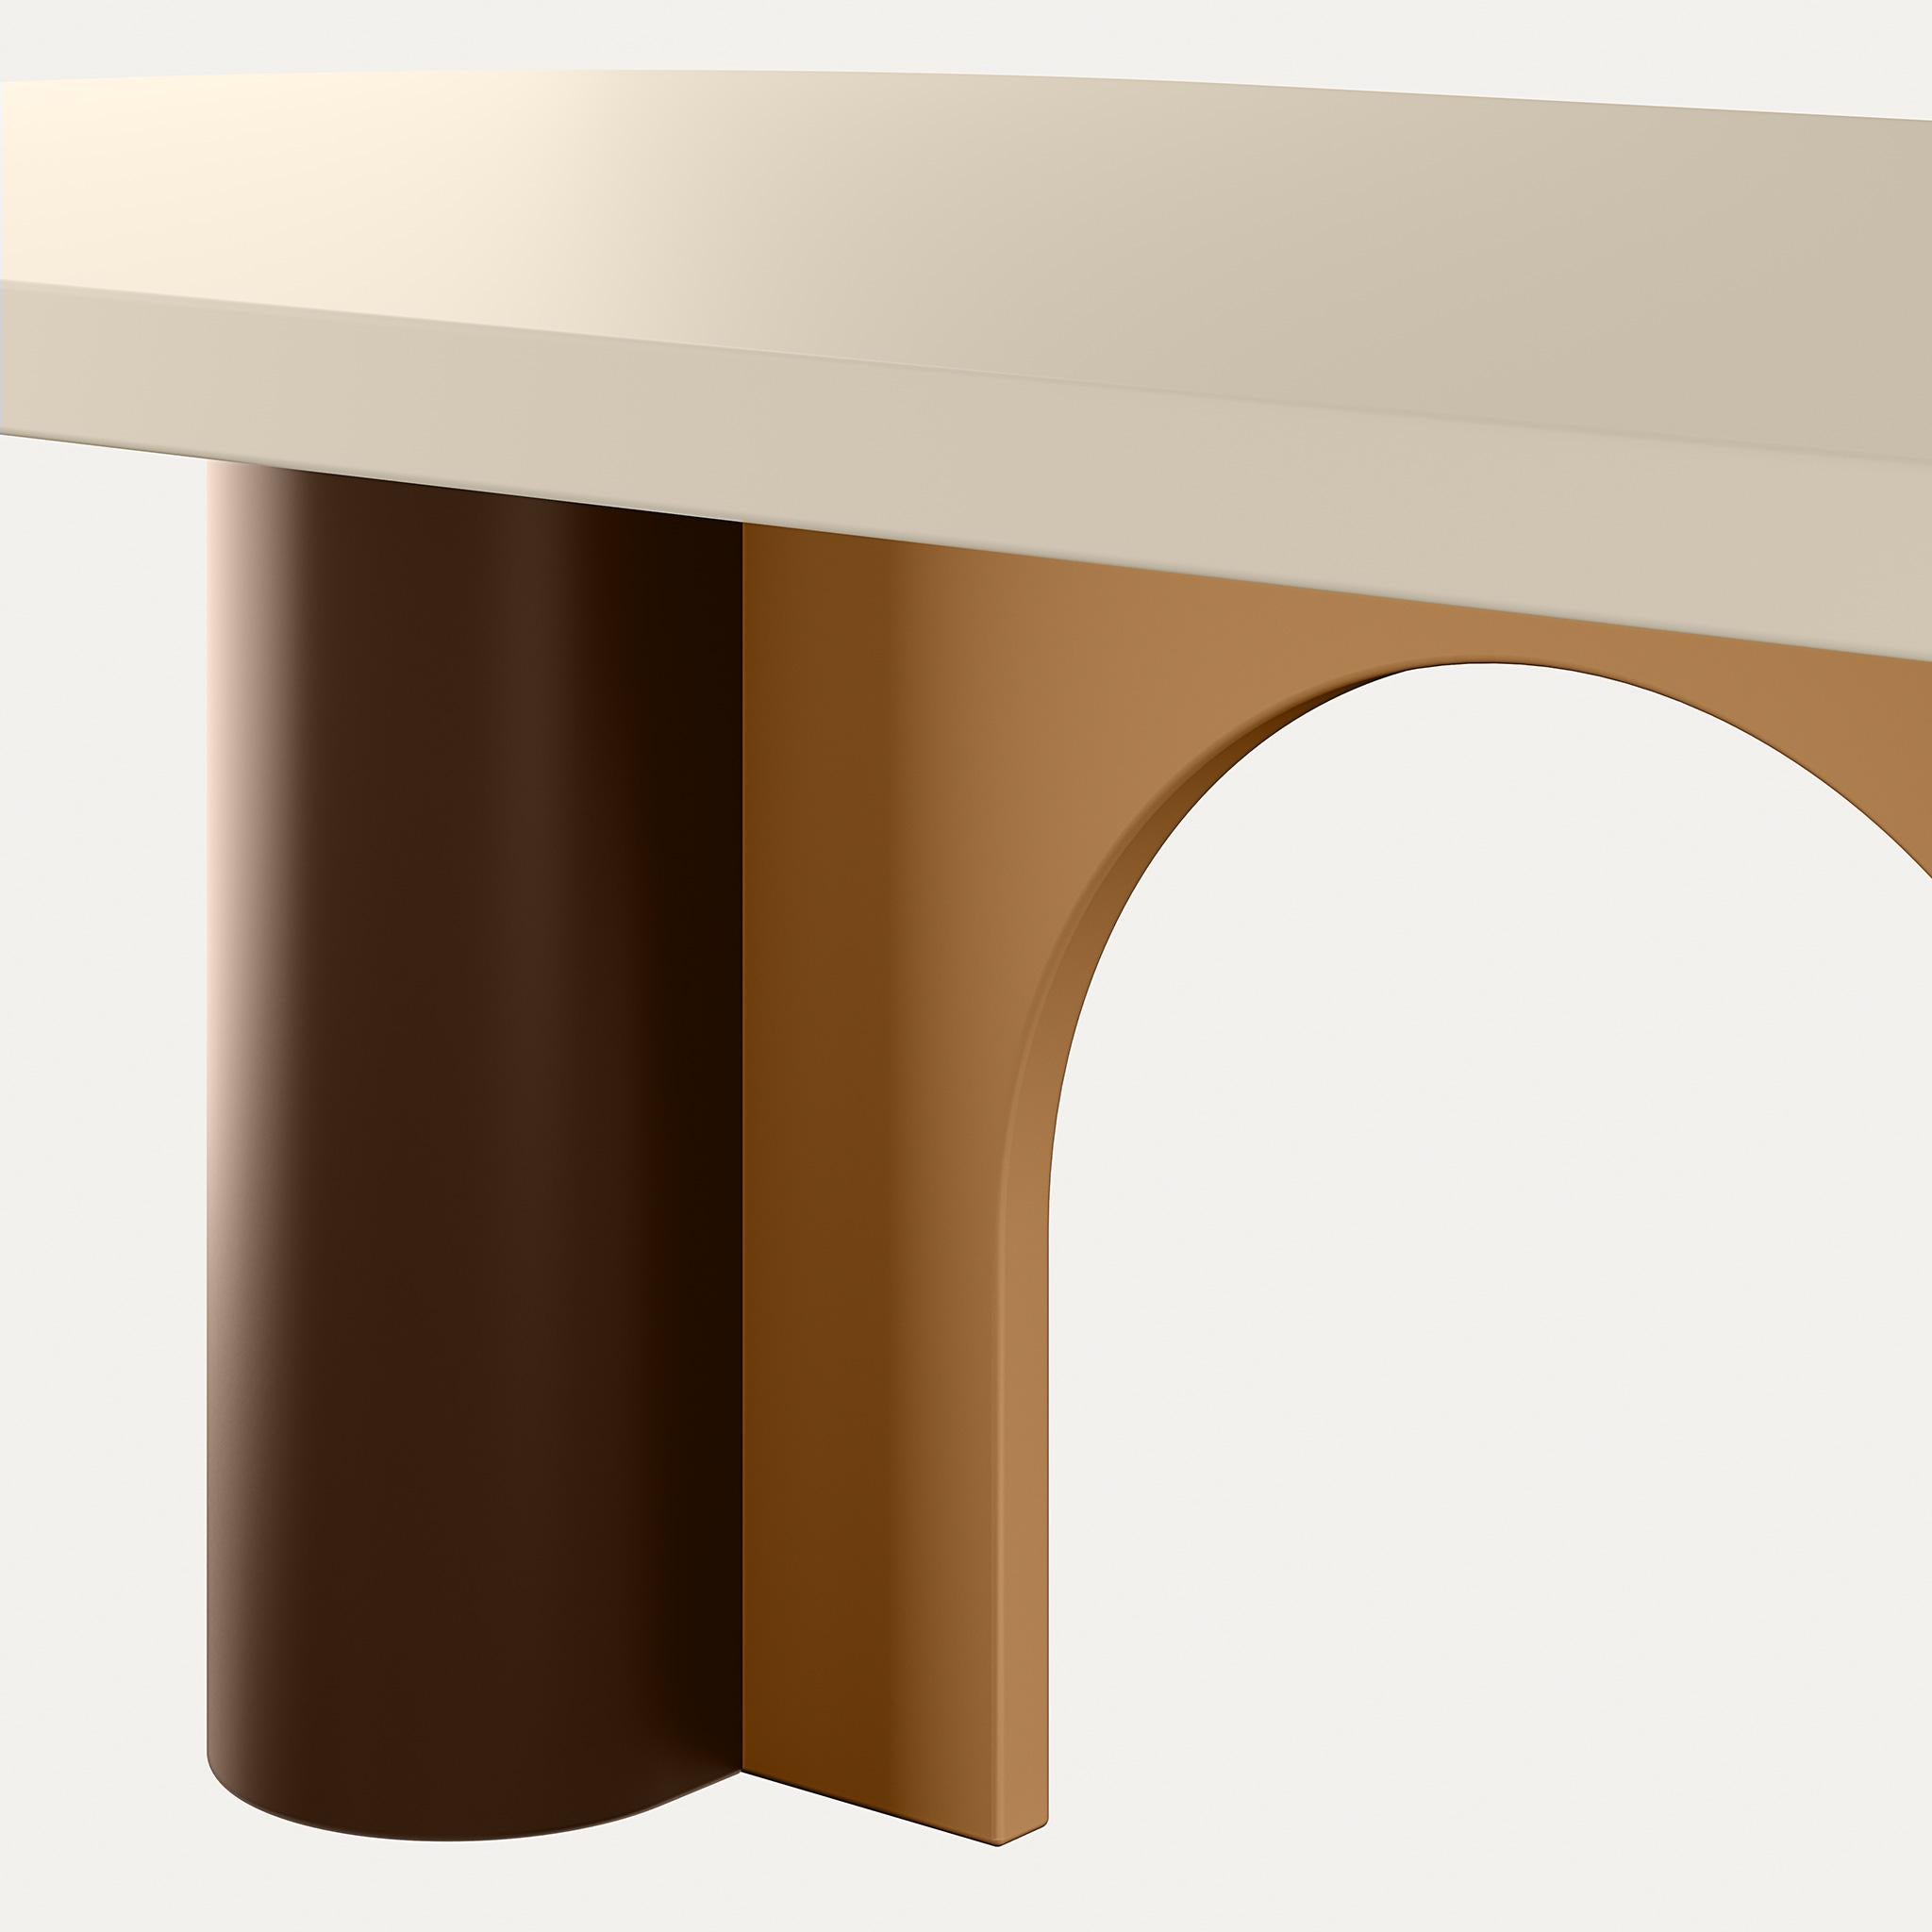 European Modern Dining Table Wood Beje Matte Light Brown and Chocolate Brown For Sale